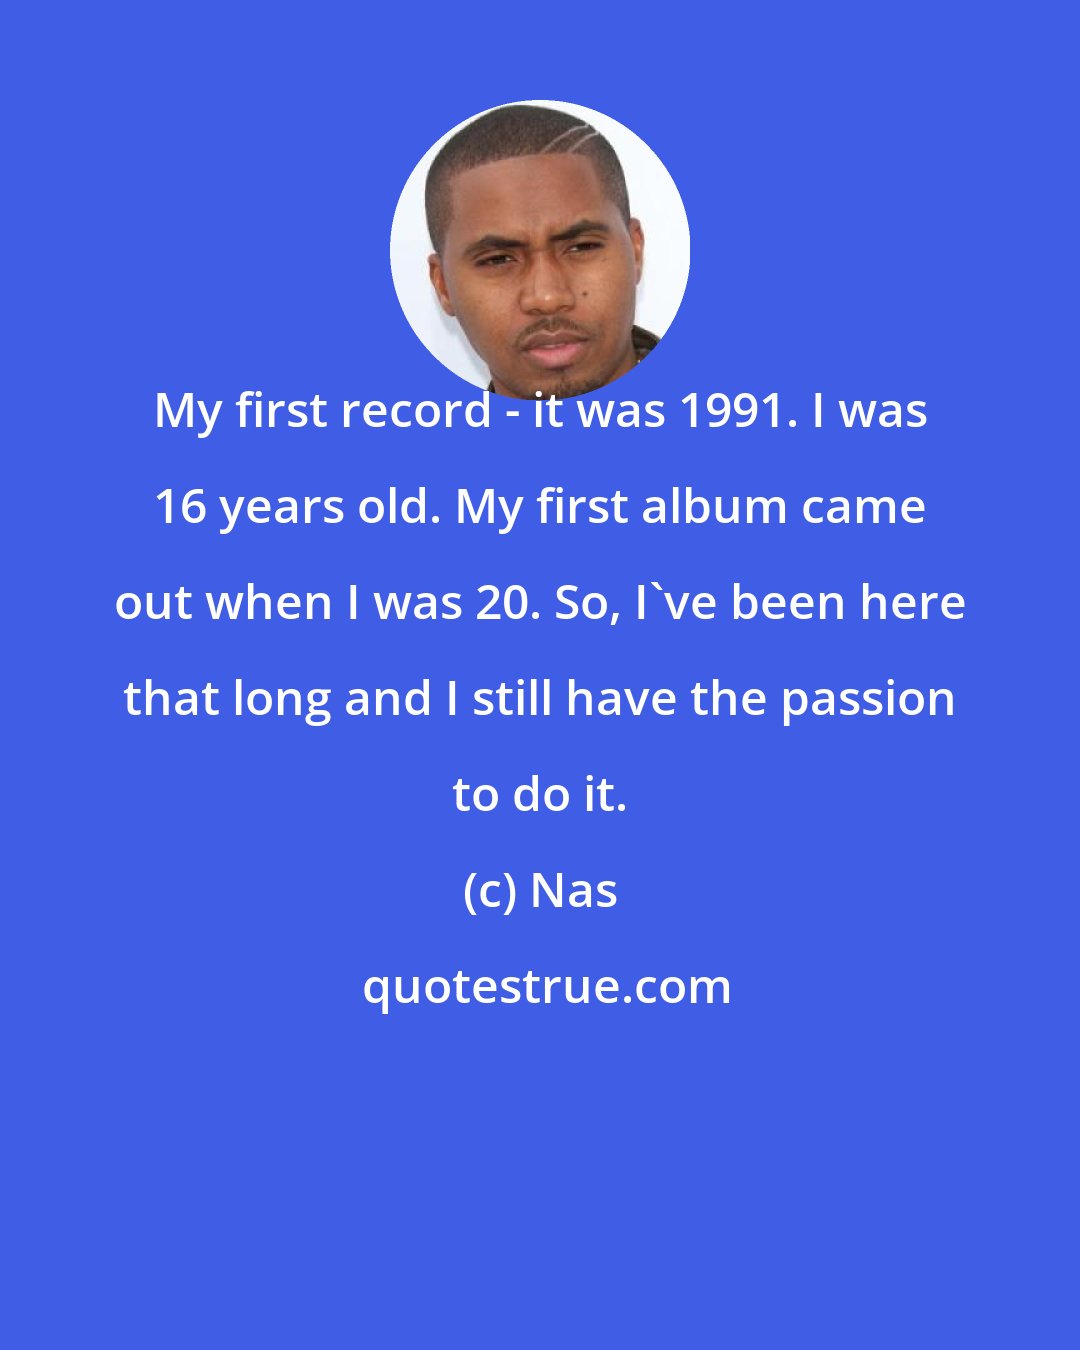 Nas: My first record - it was 1991. I was 16 years old. My first album came out when I was 20. So, I've been here that long and I still have the passion to do it.